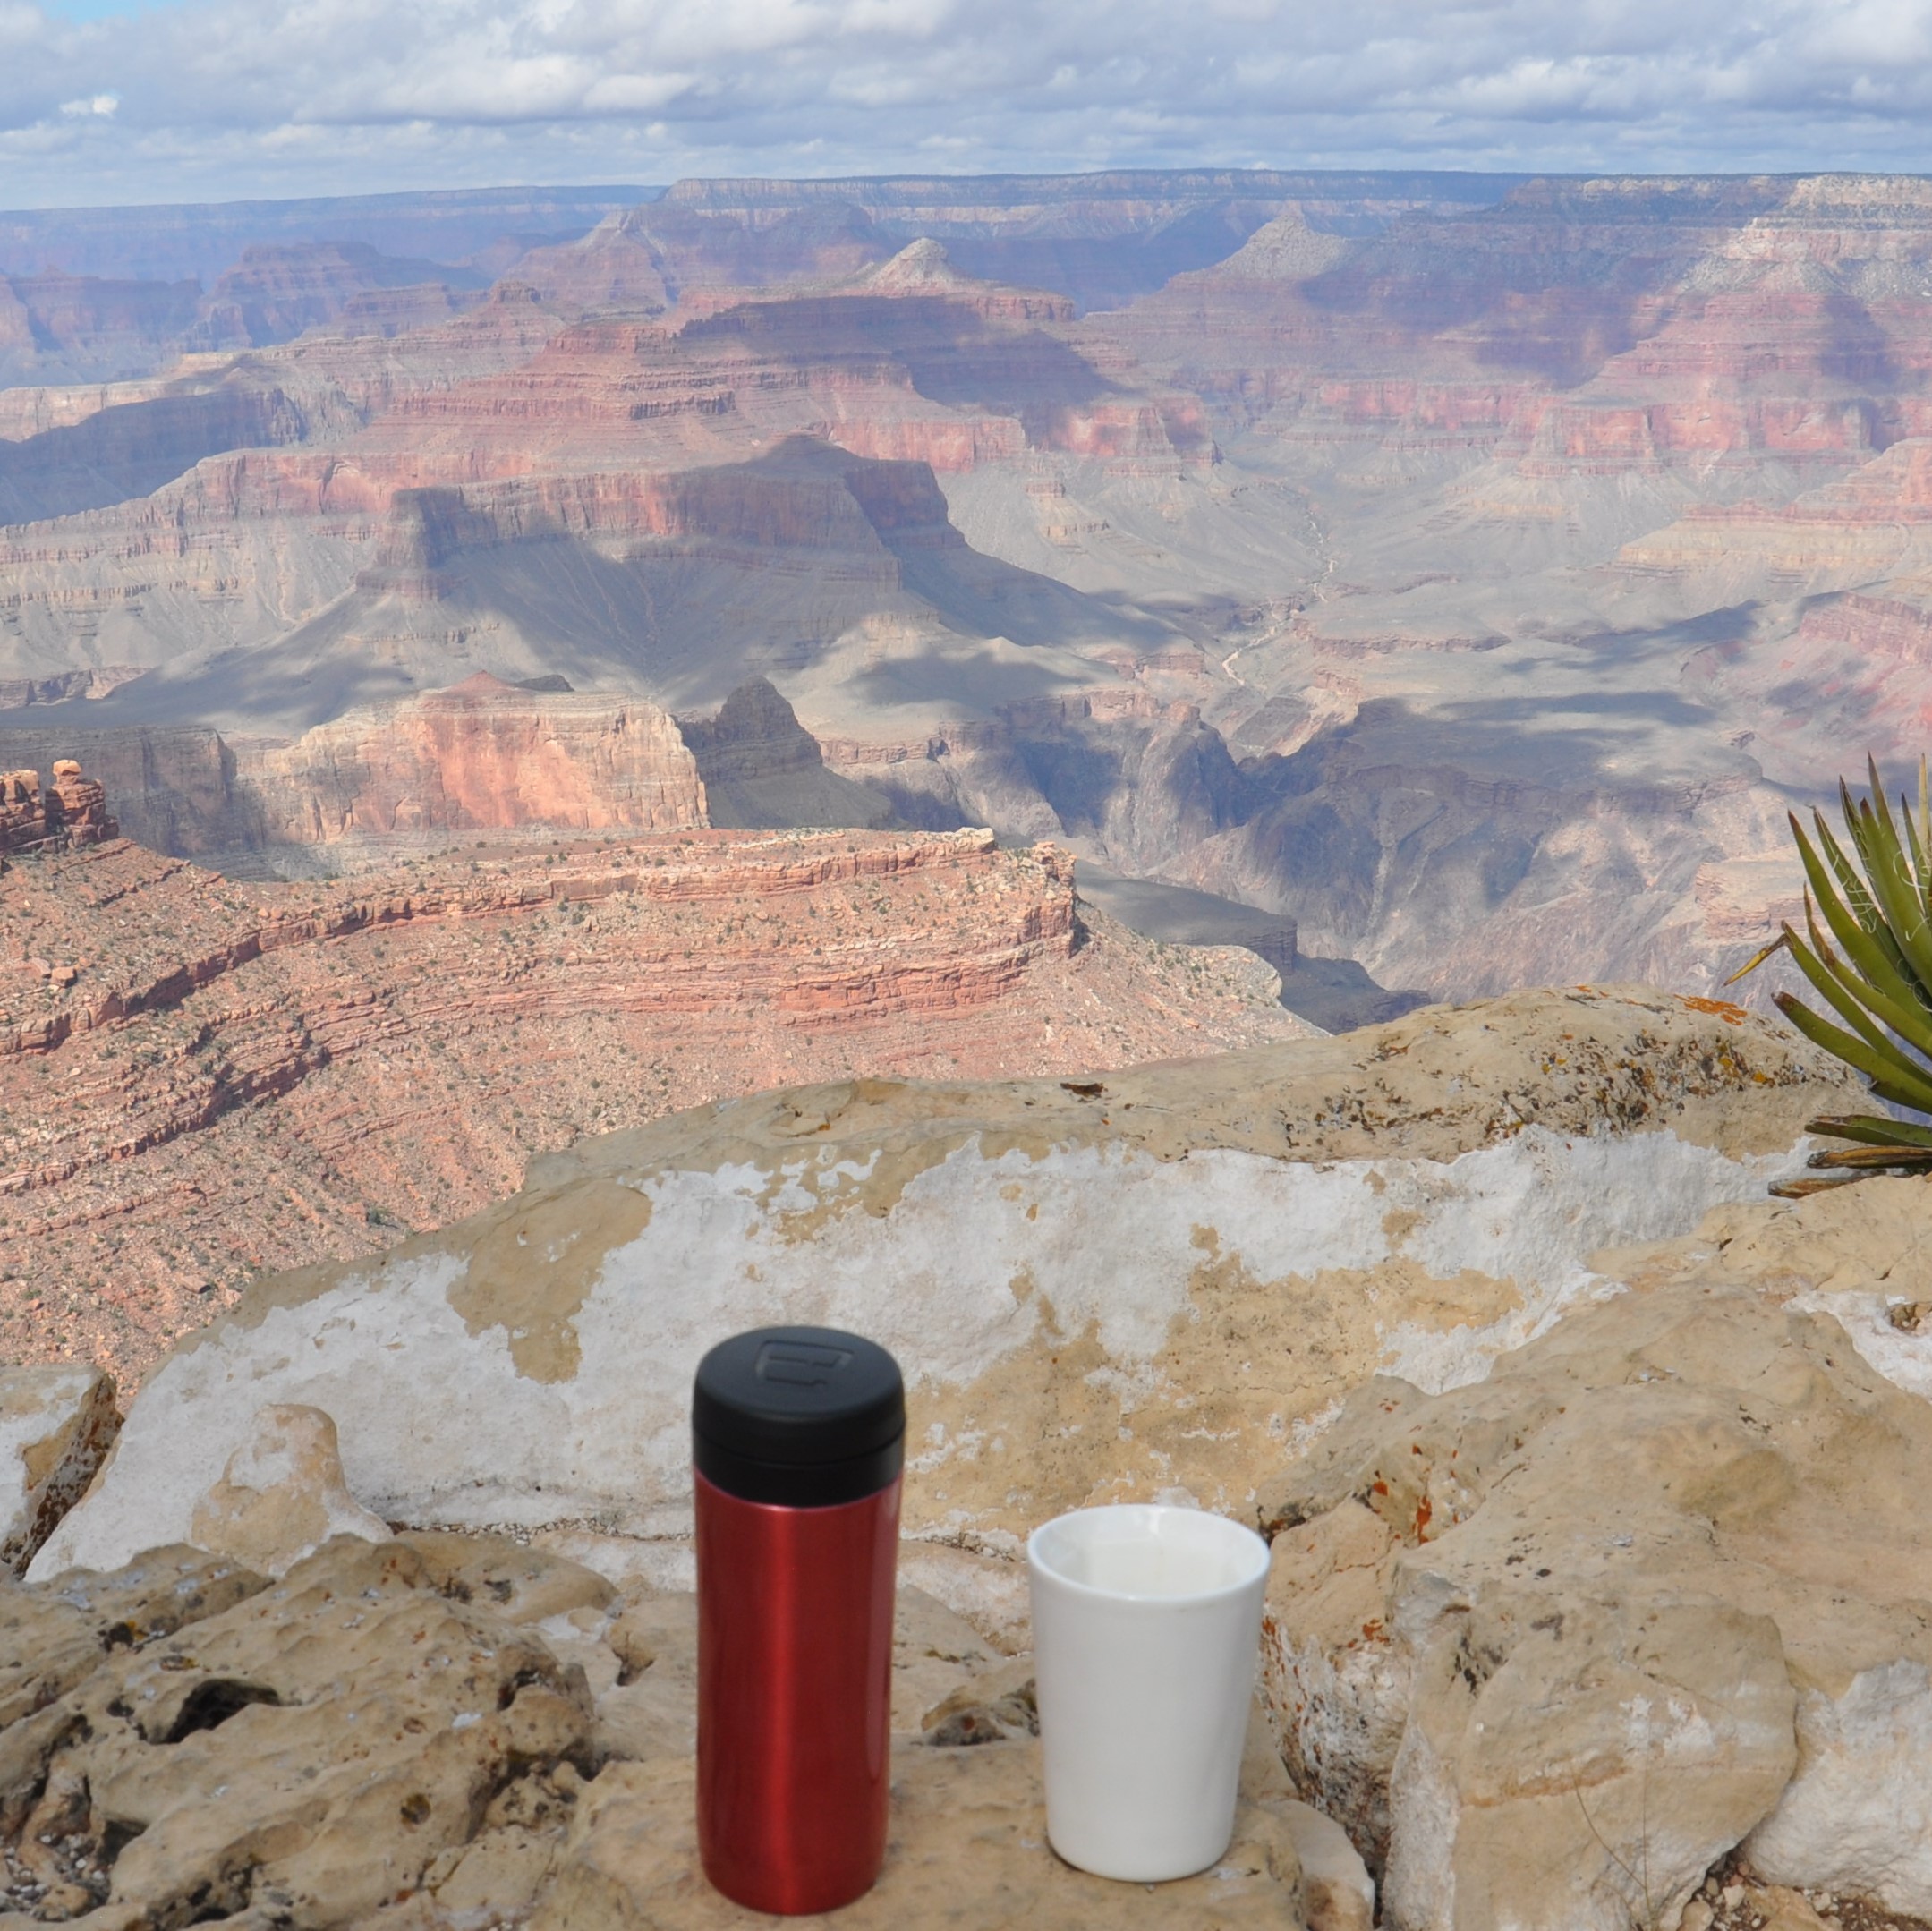 My coffee, in the shape of my Travel Press and Therma Cup, takes in the views from the South Rim of the Grand Canyon near the start of the Trail of Time.